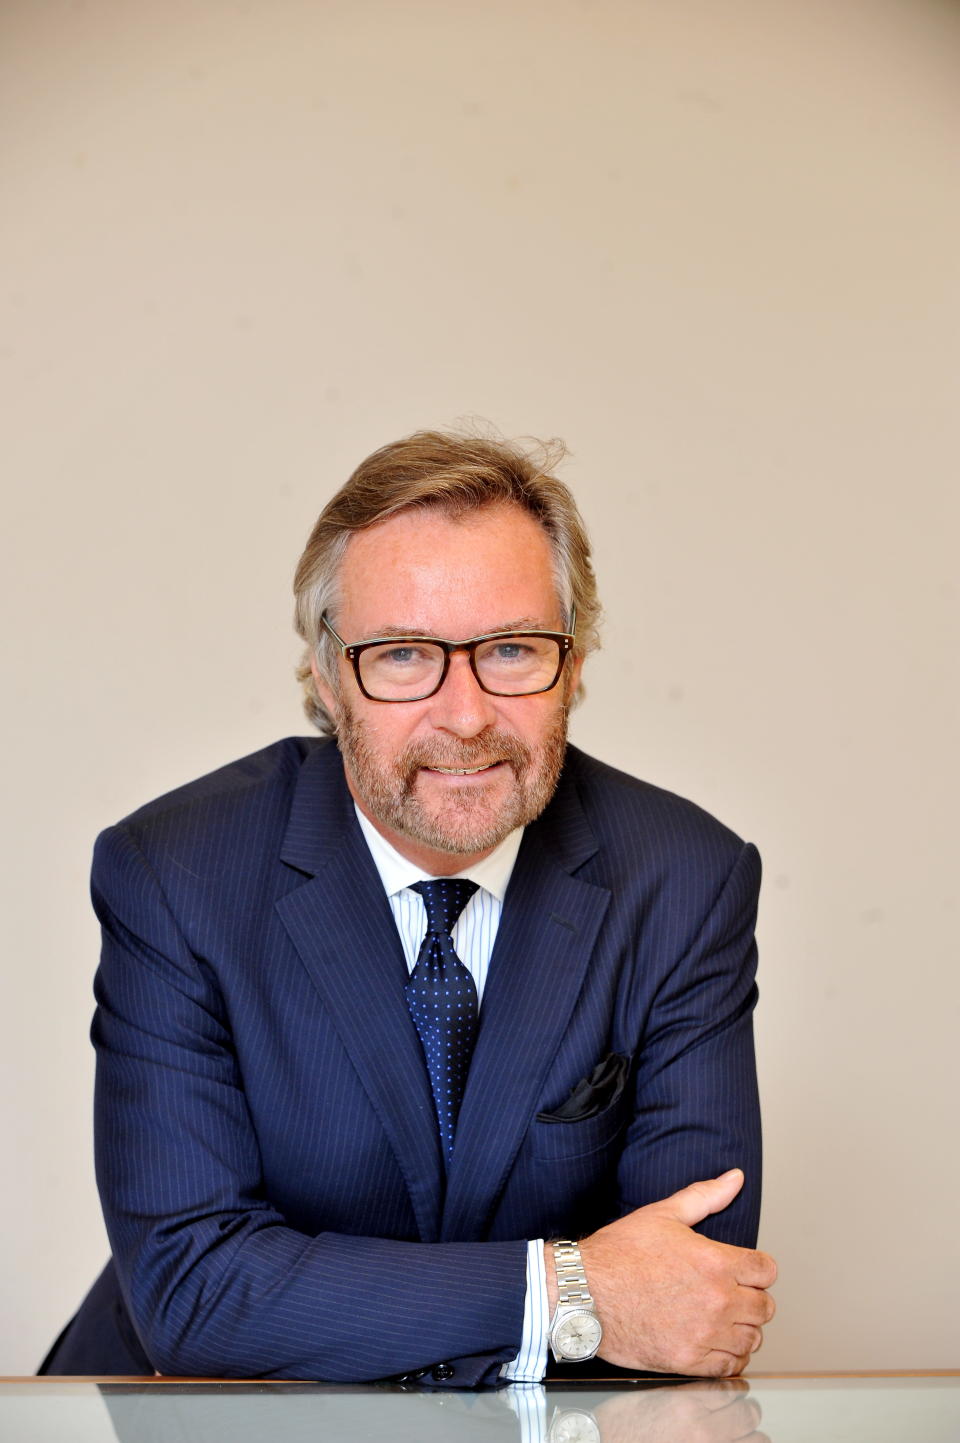 Brian Duffy, chief executive officer of Watches of Switzerland Group.